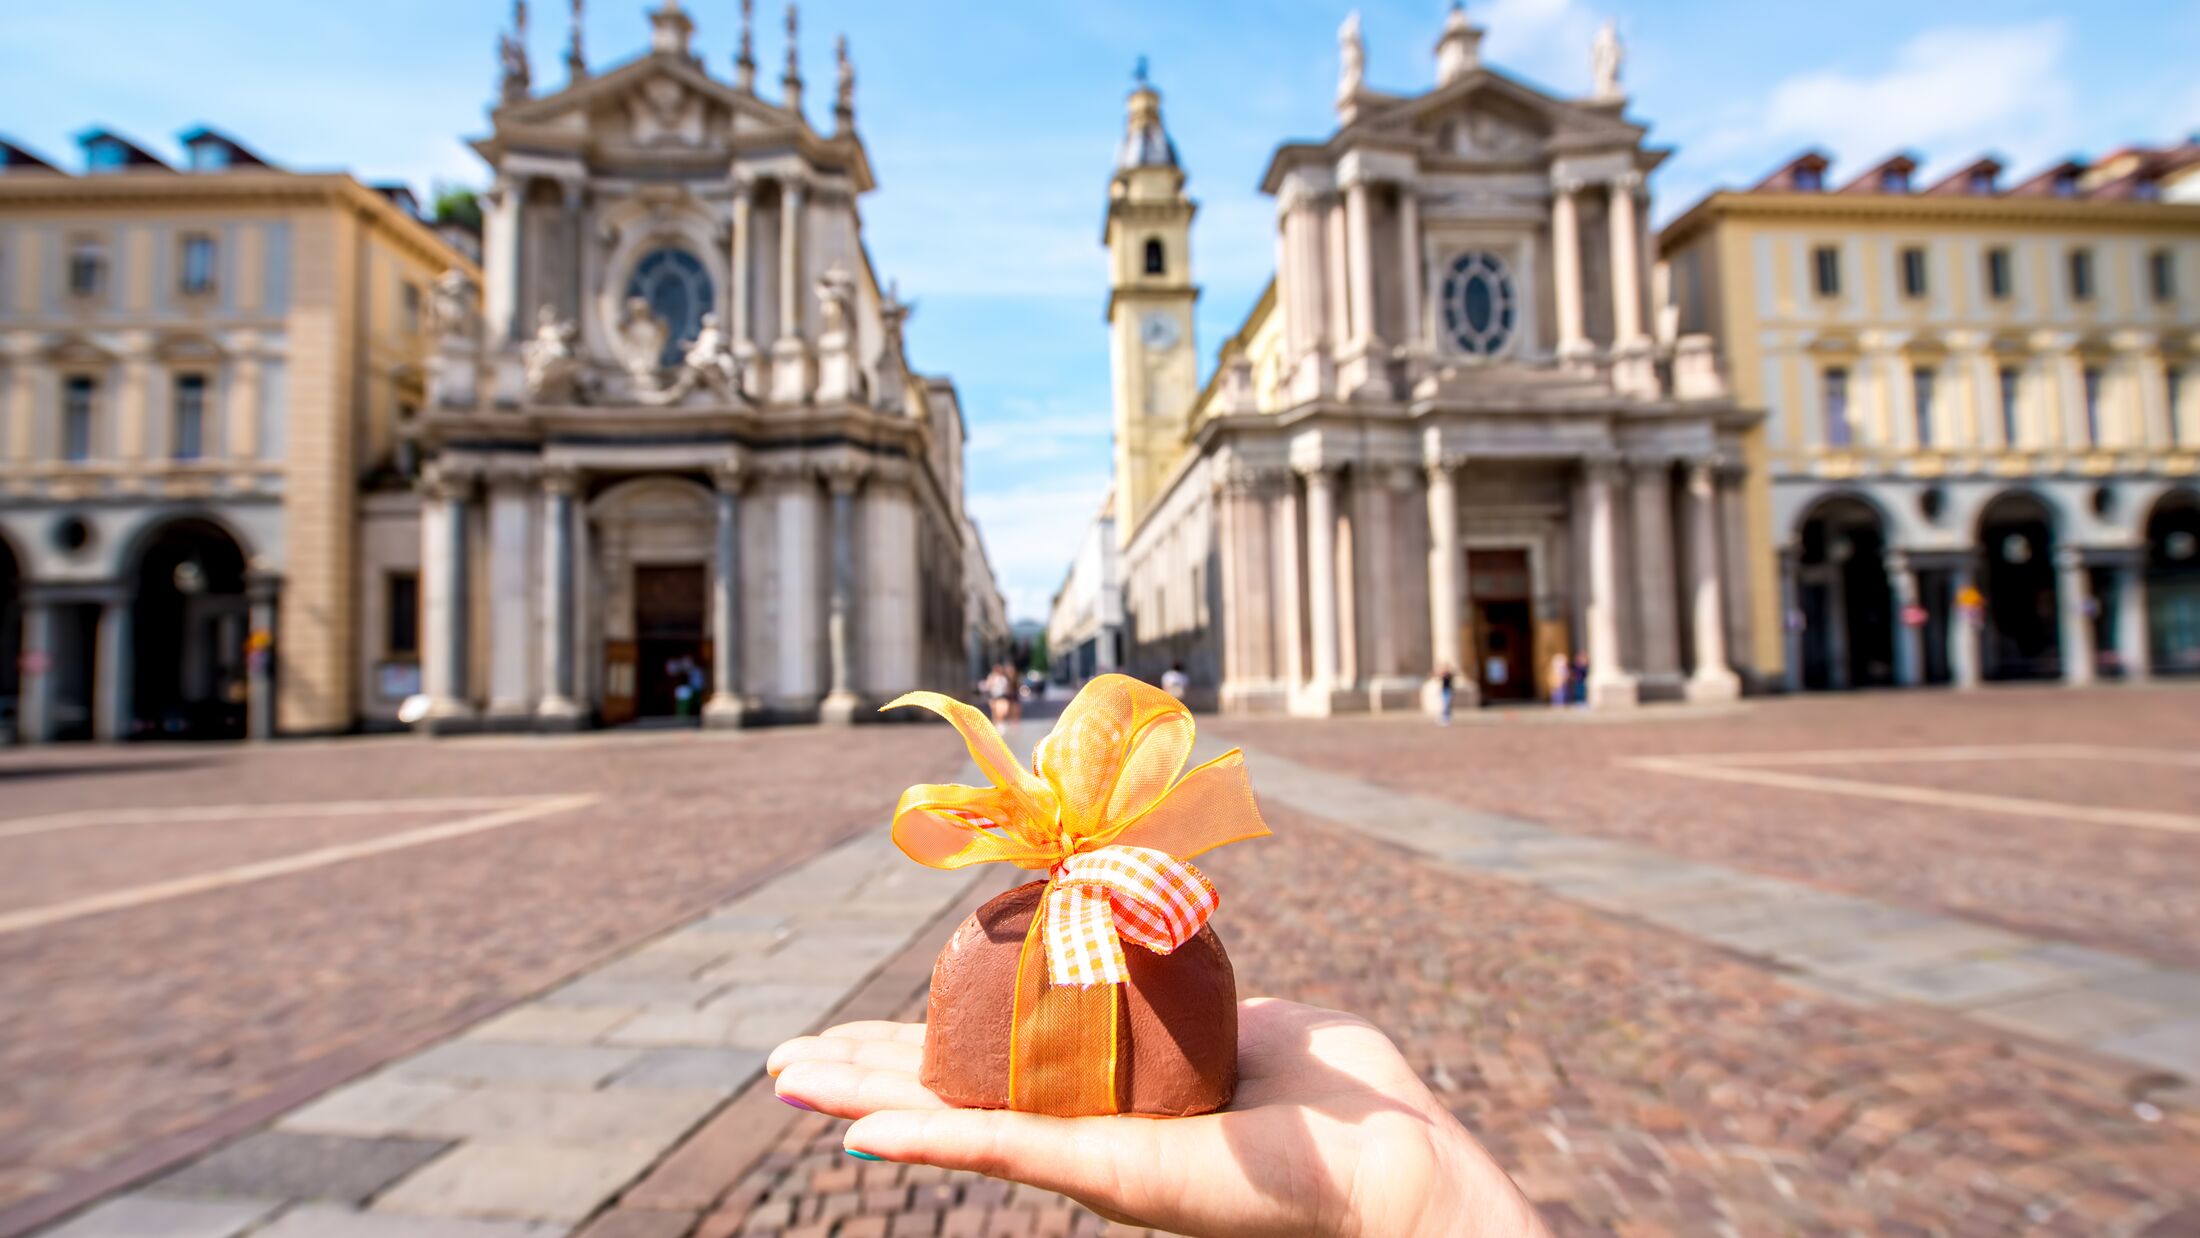 Holding italian chocolate with bow on Turin city background. Turin in Piedmont region in Italy is famous of its chocolate making